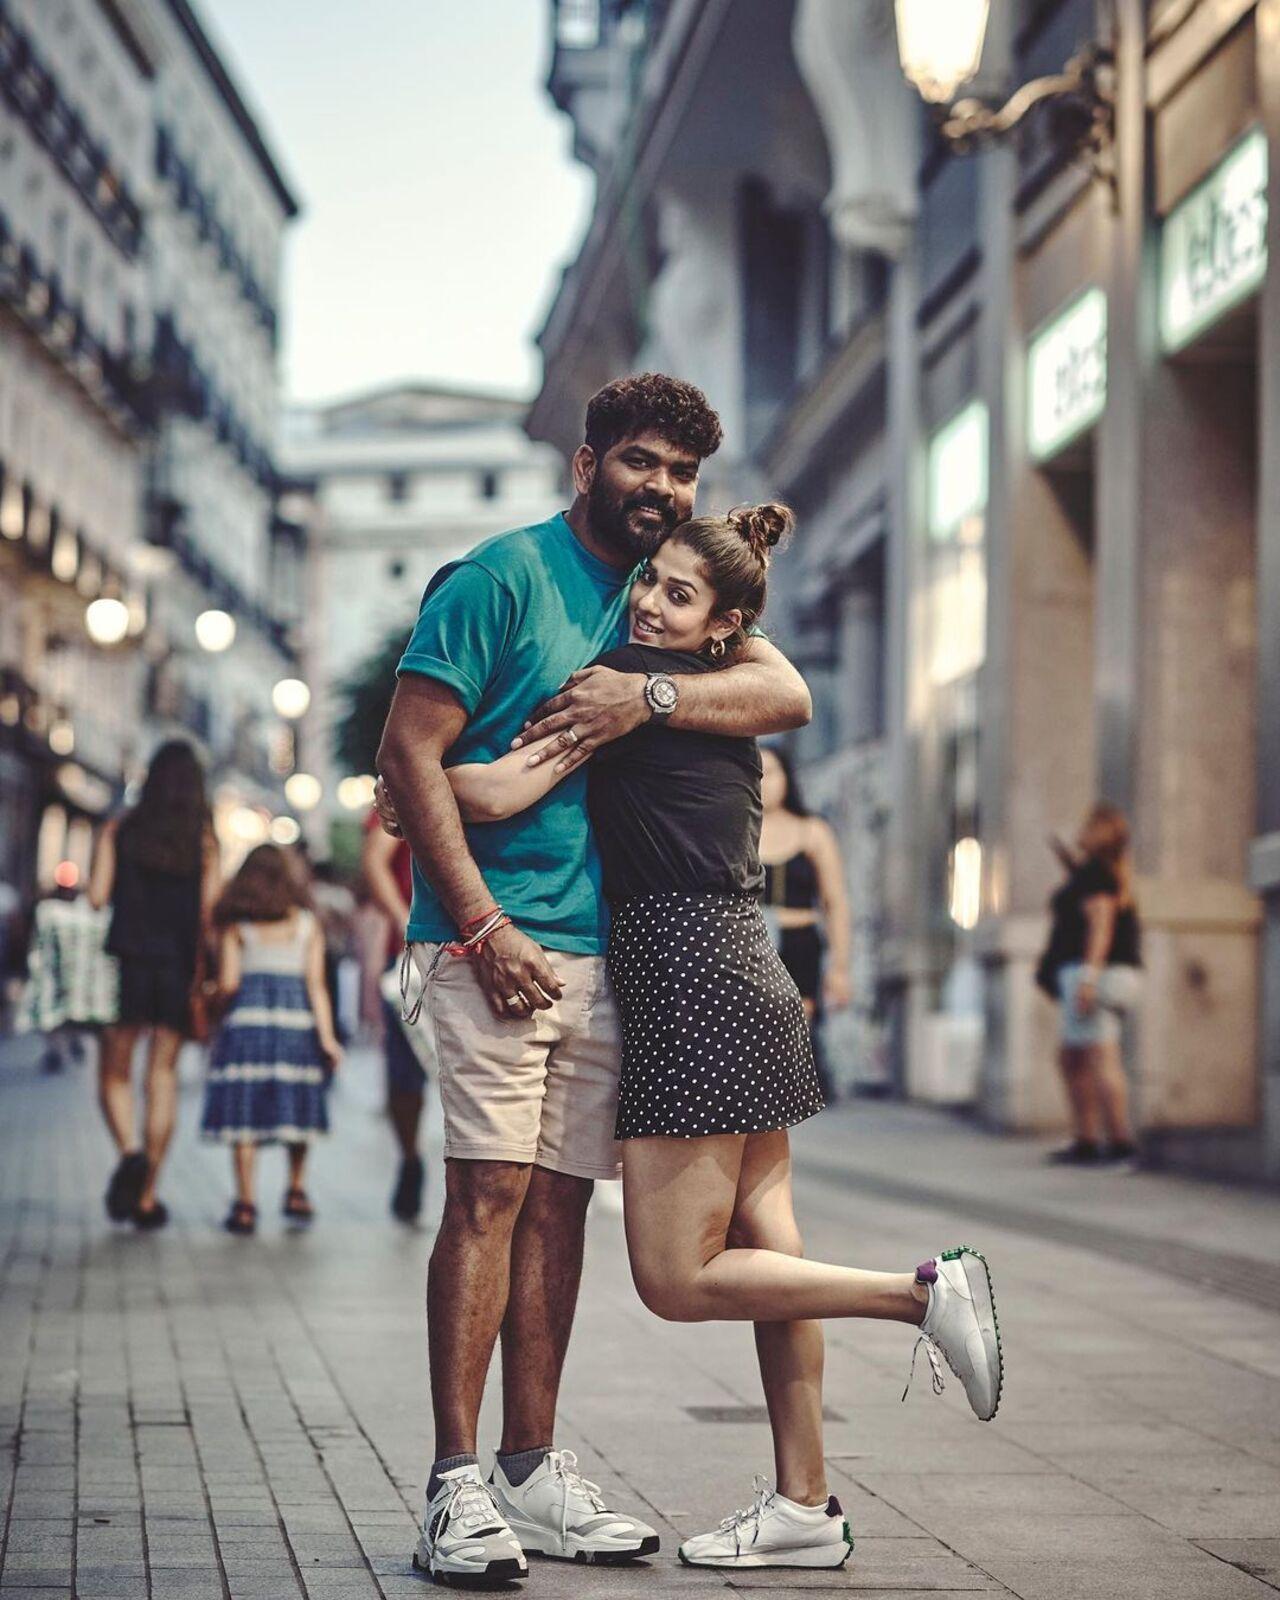 Nayanthara and Vignesh first met on the sets of the 2015 Tamil film, Naanum Rowdy Dhaan. Within no time, they bonded well and love was in the air